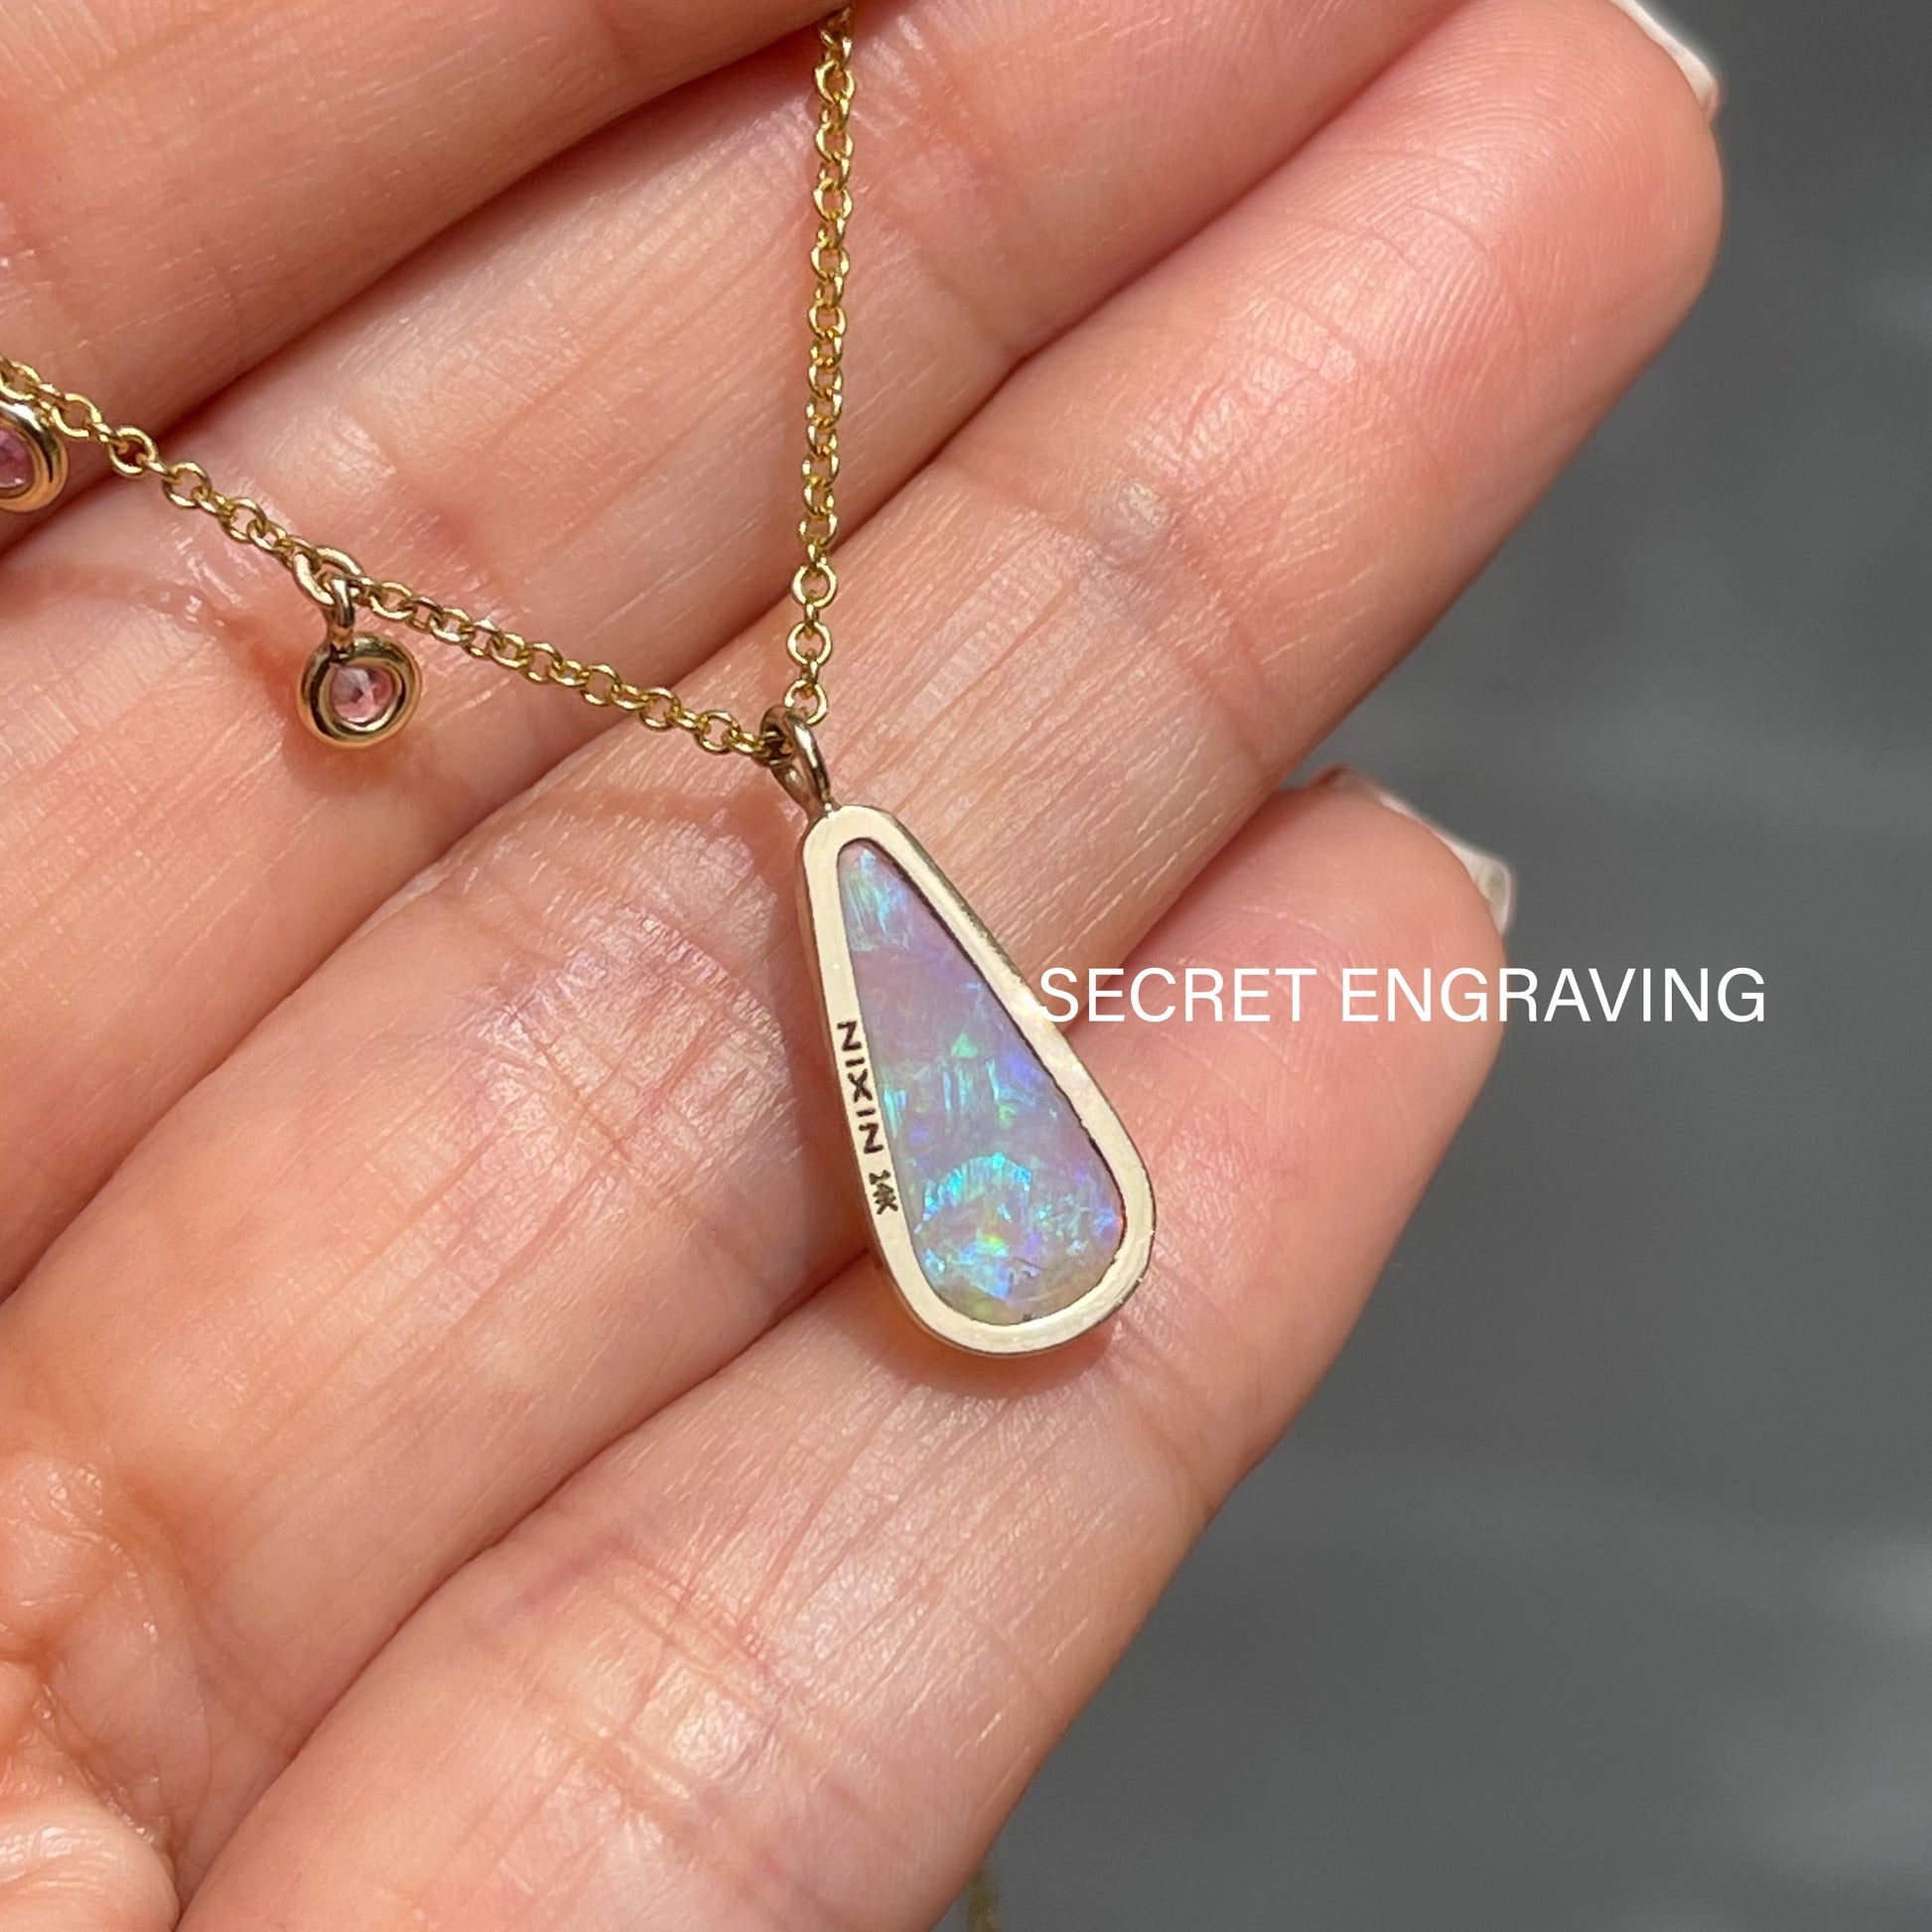 Back of Australian Opal Necklace by NIXIN Jewelry. Photo shows where secret engraving is.